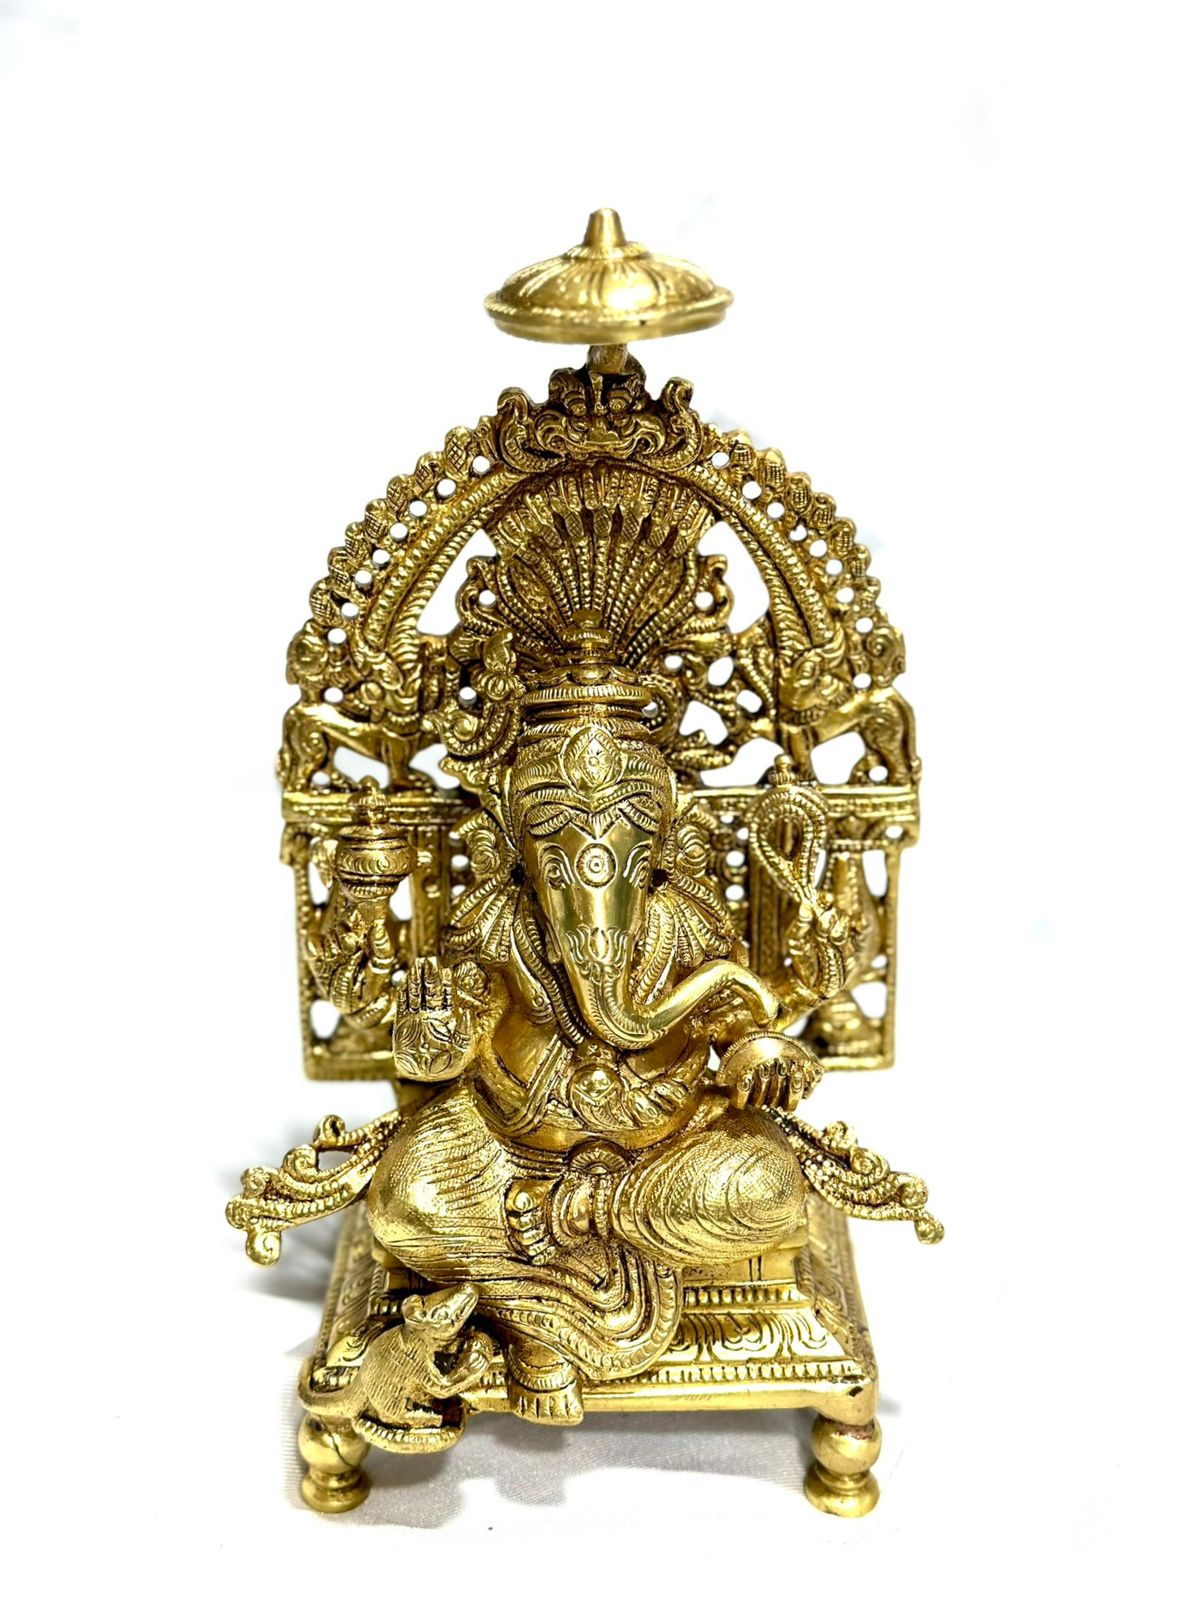 Excellent Quality Brass Handmade Lord Ganesh With Rat Collectible By Tamrapatra